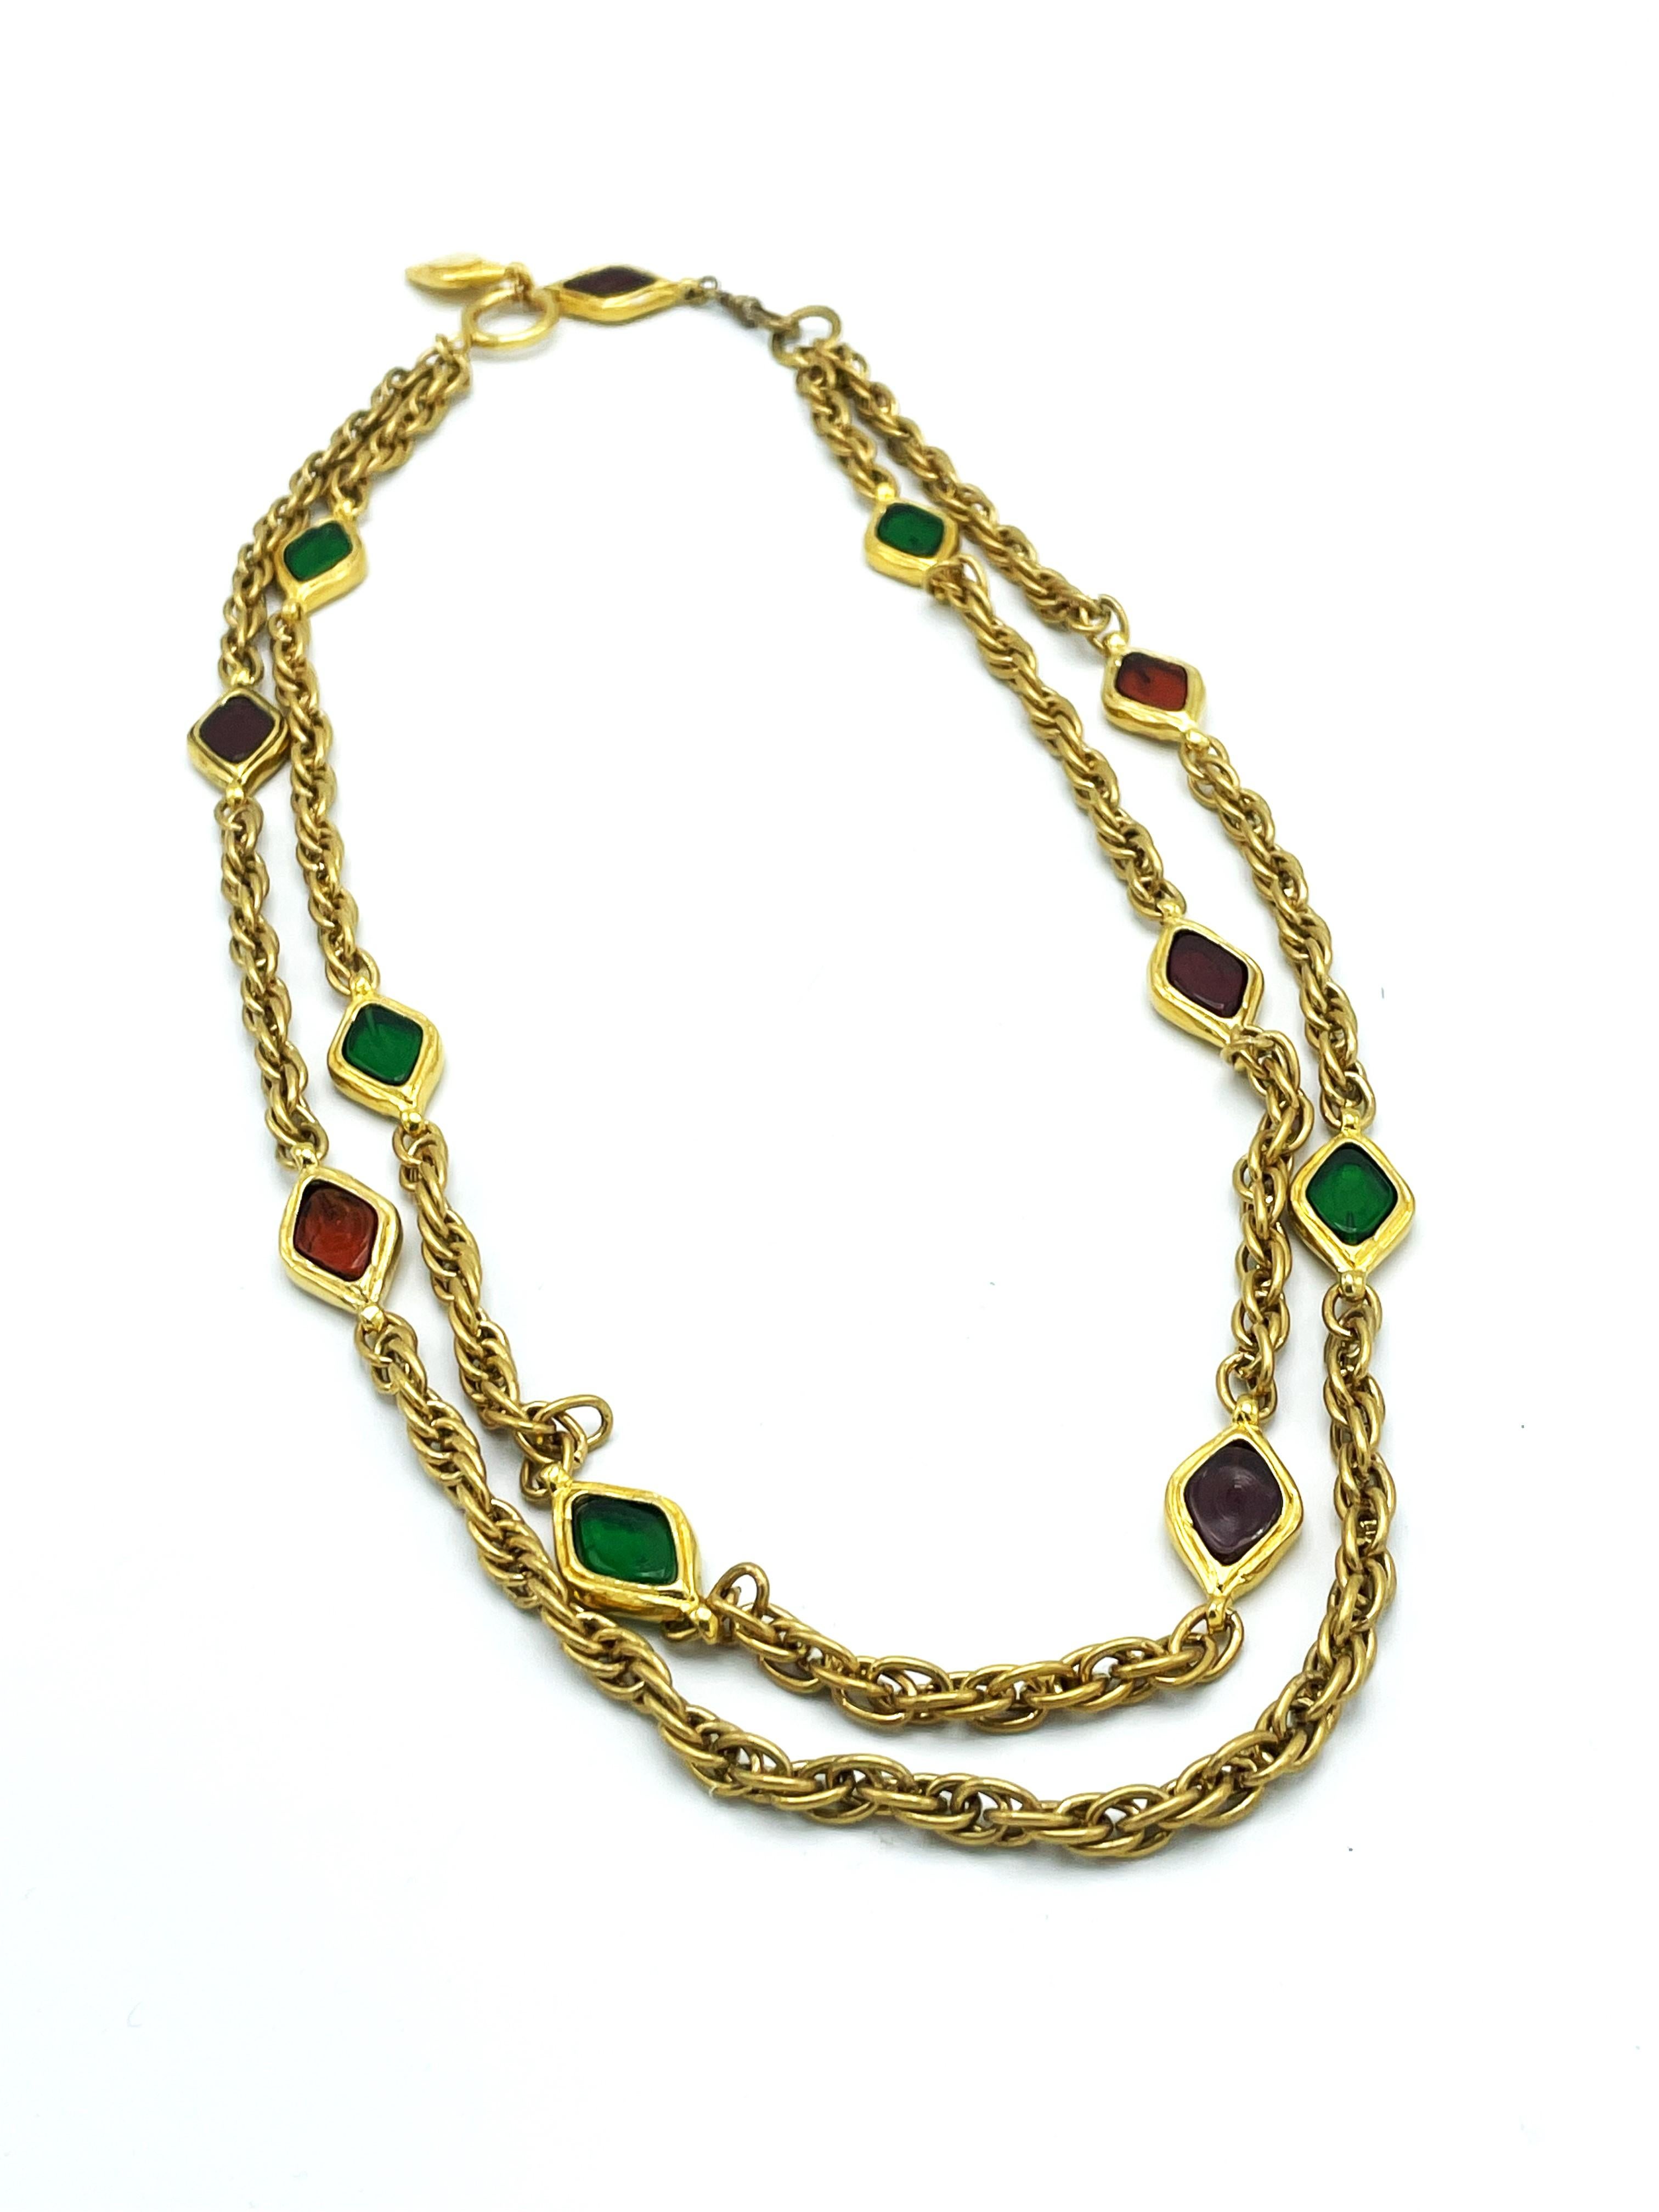  2 row Chanel necklace with red and green pate the verre, gold plated, 1970/80's For Sale 1